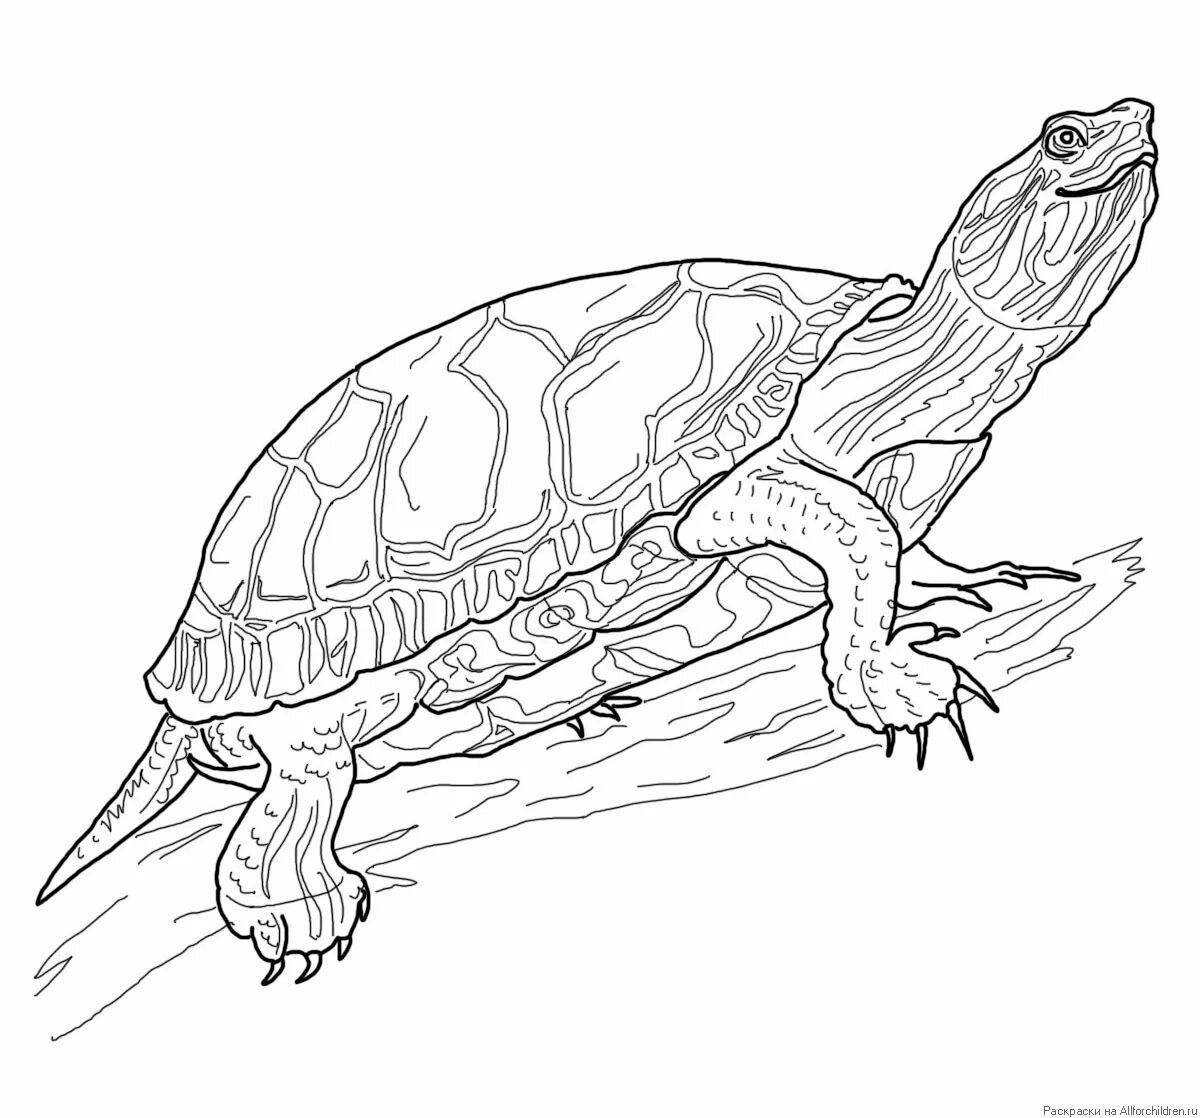 Exquisite reptile coloring pages